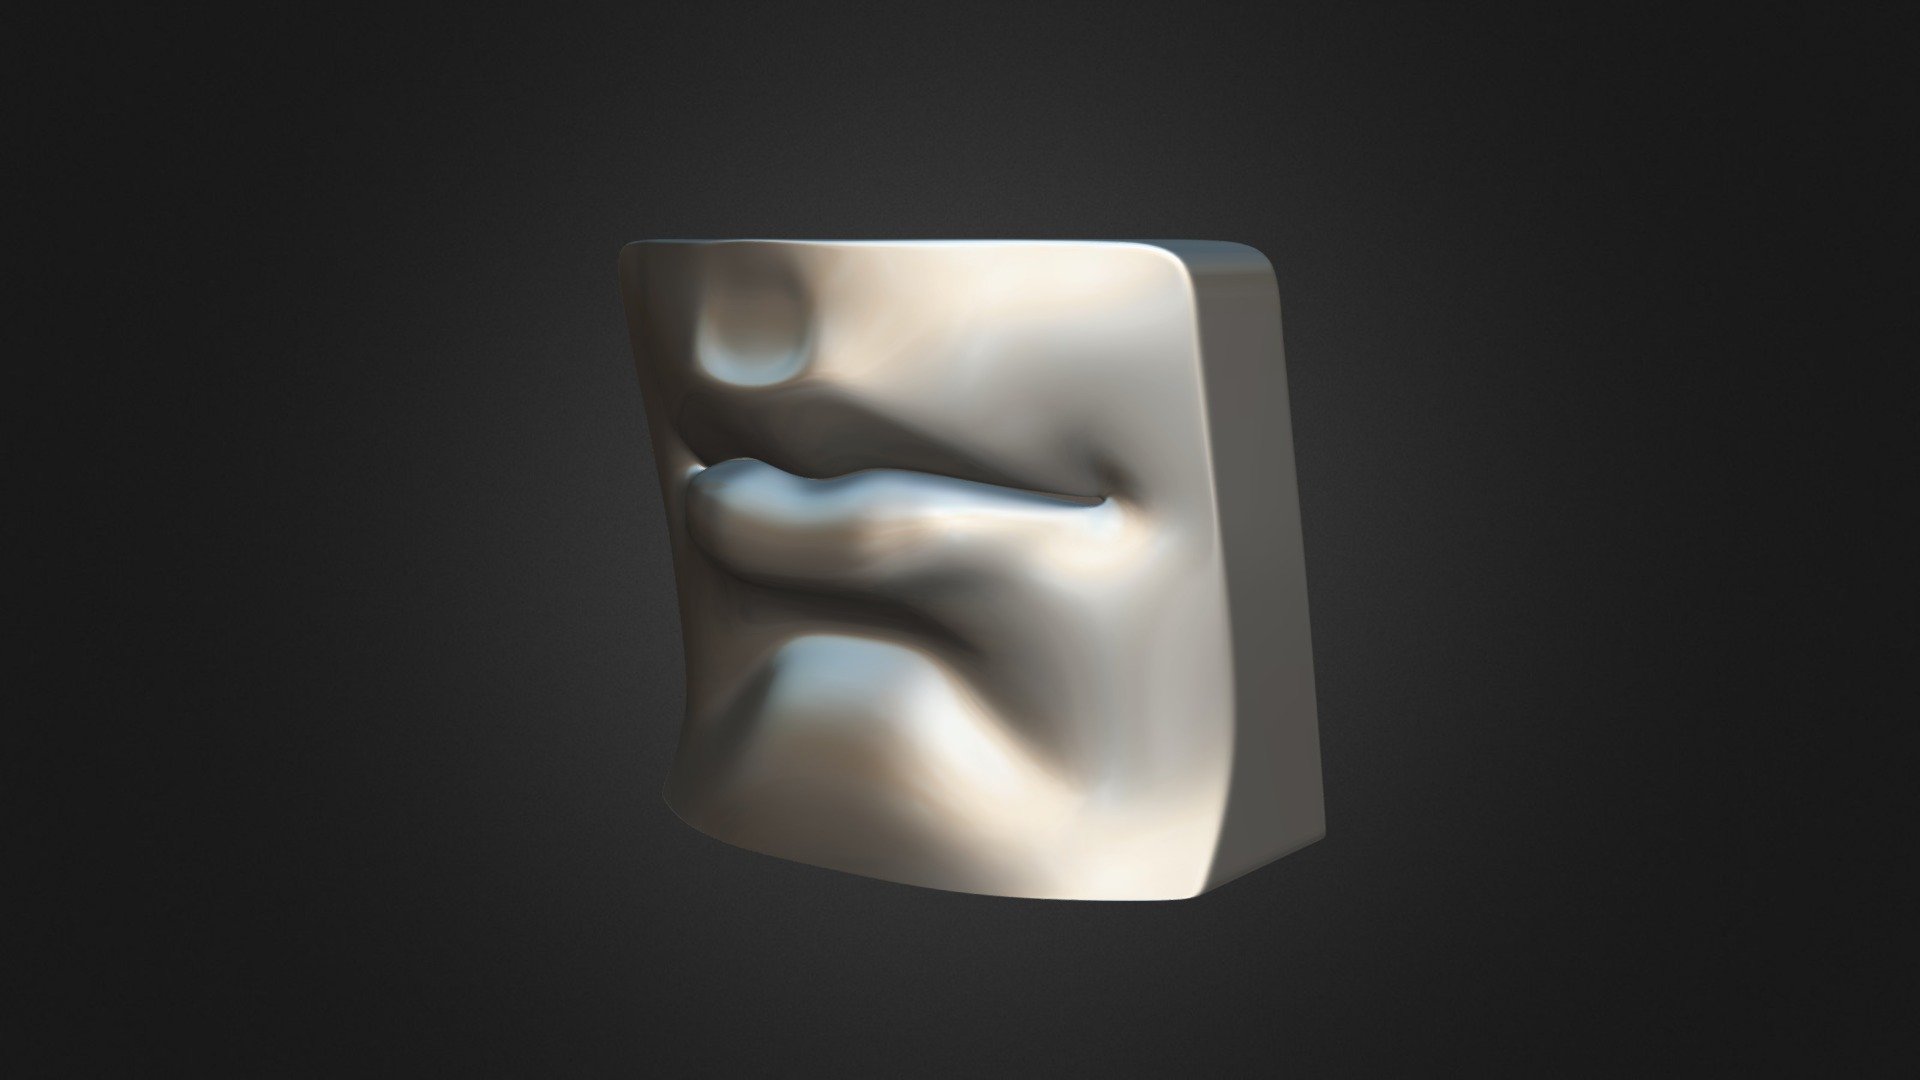 Mouth Model 2